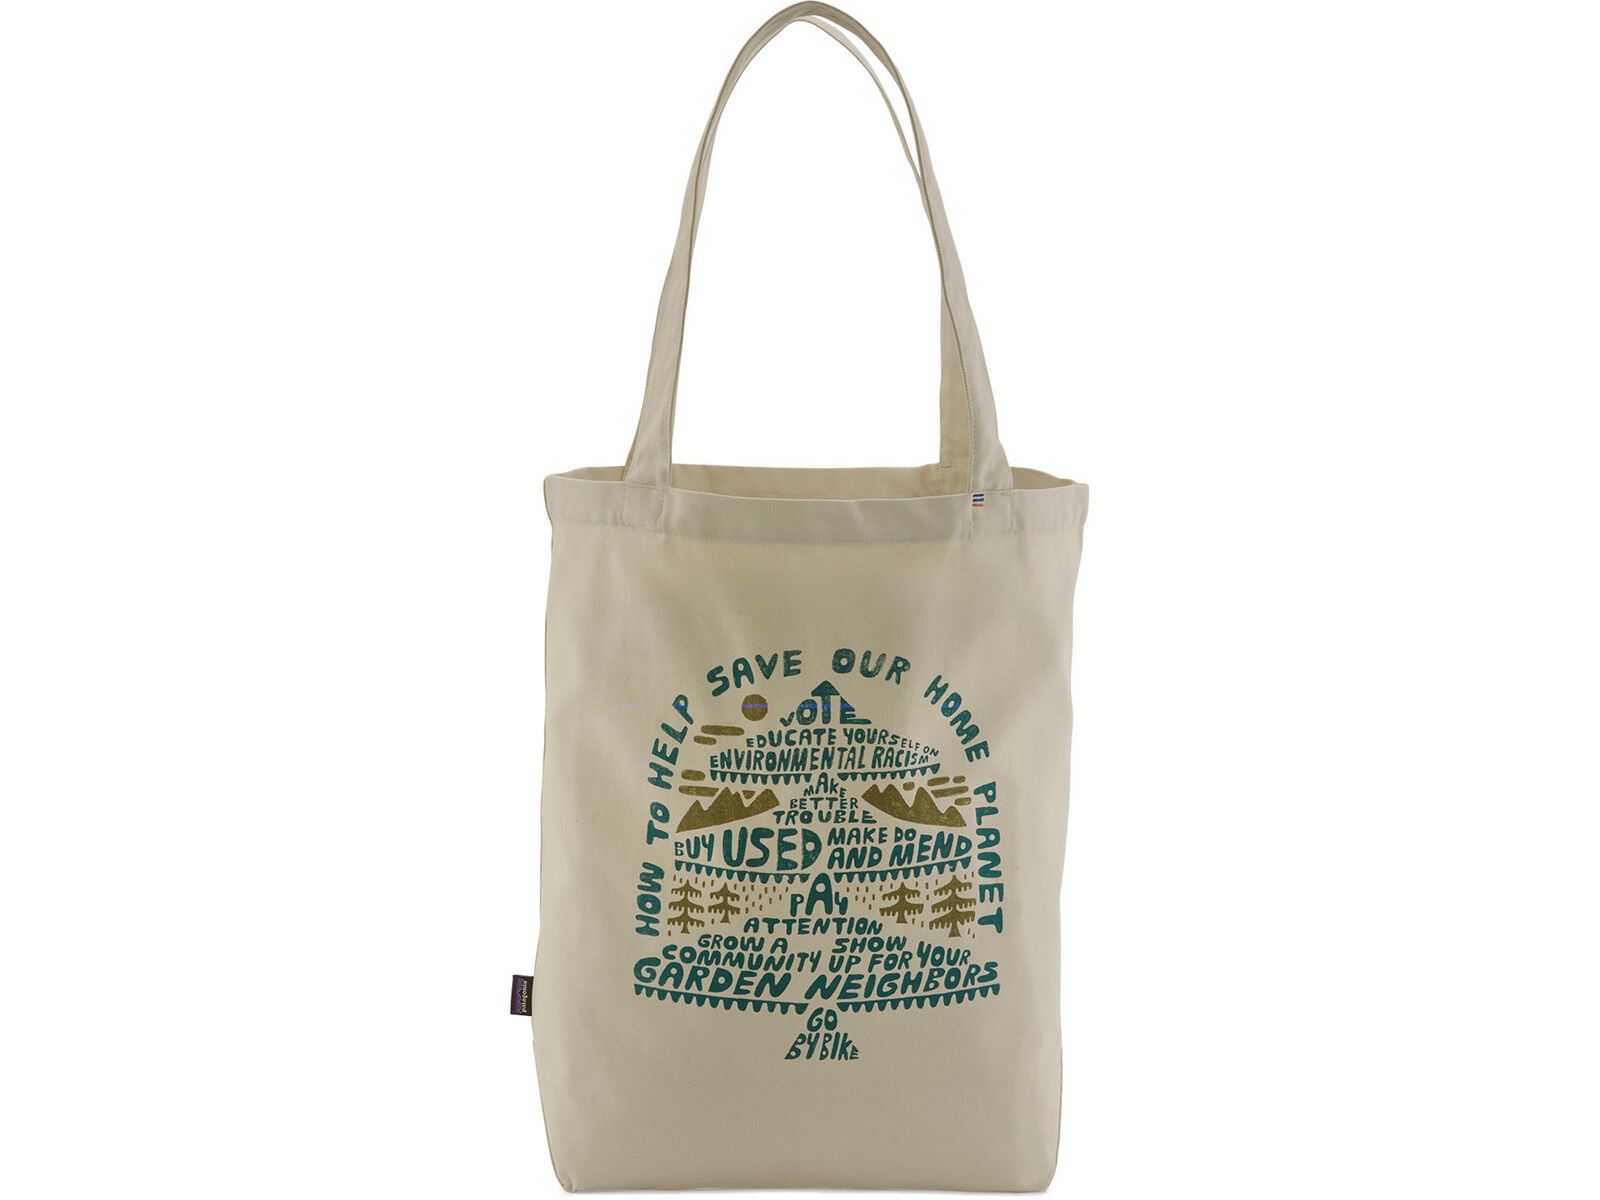 Patagonia Market Tote How to Save, bleached stone | Bild 1